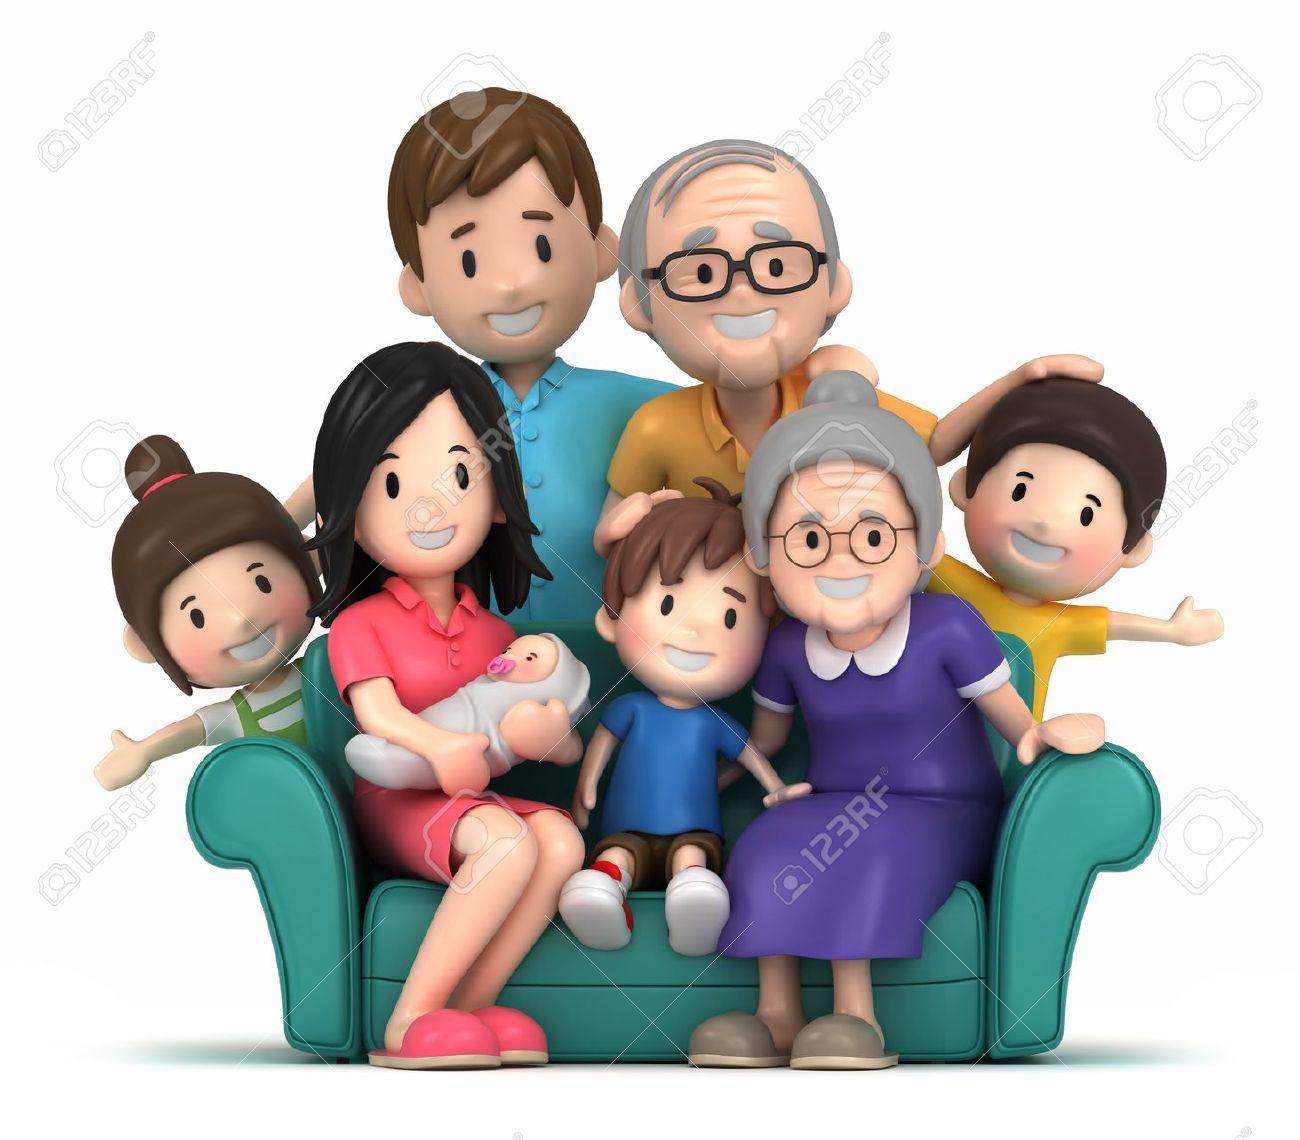 Family adult clipart stock photos images royalty free adult clipart